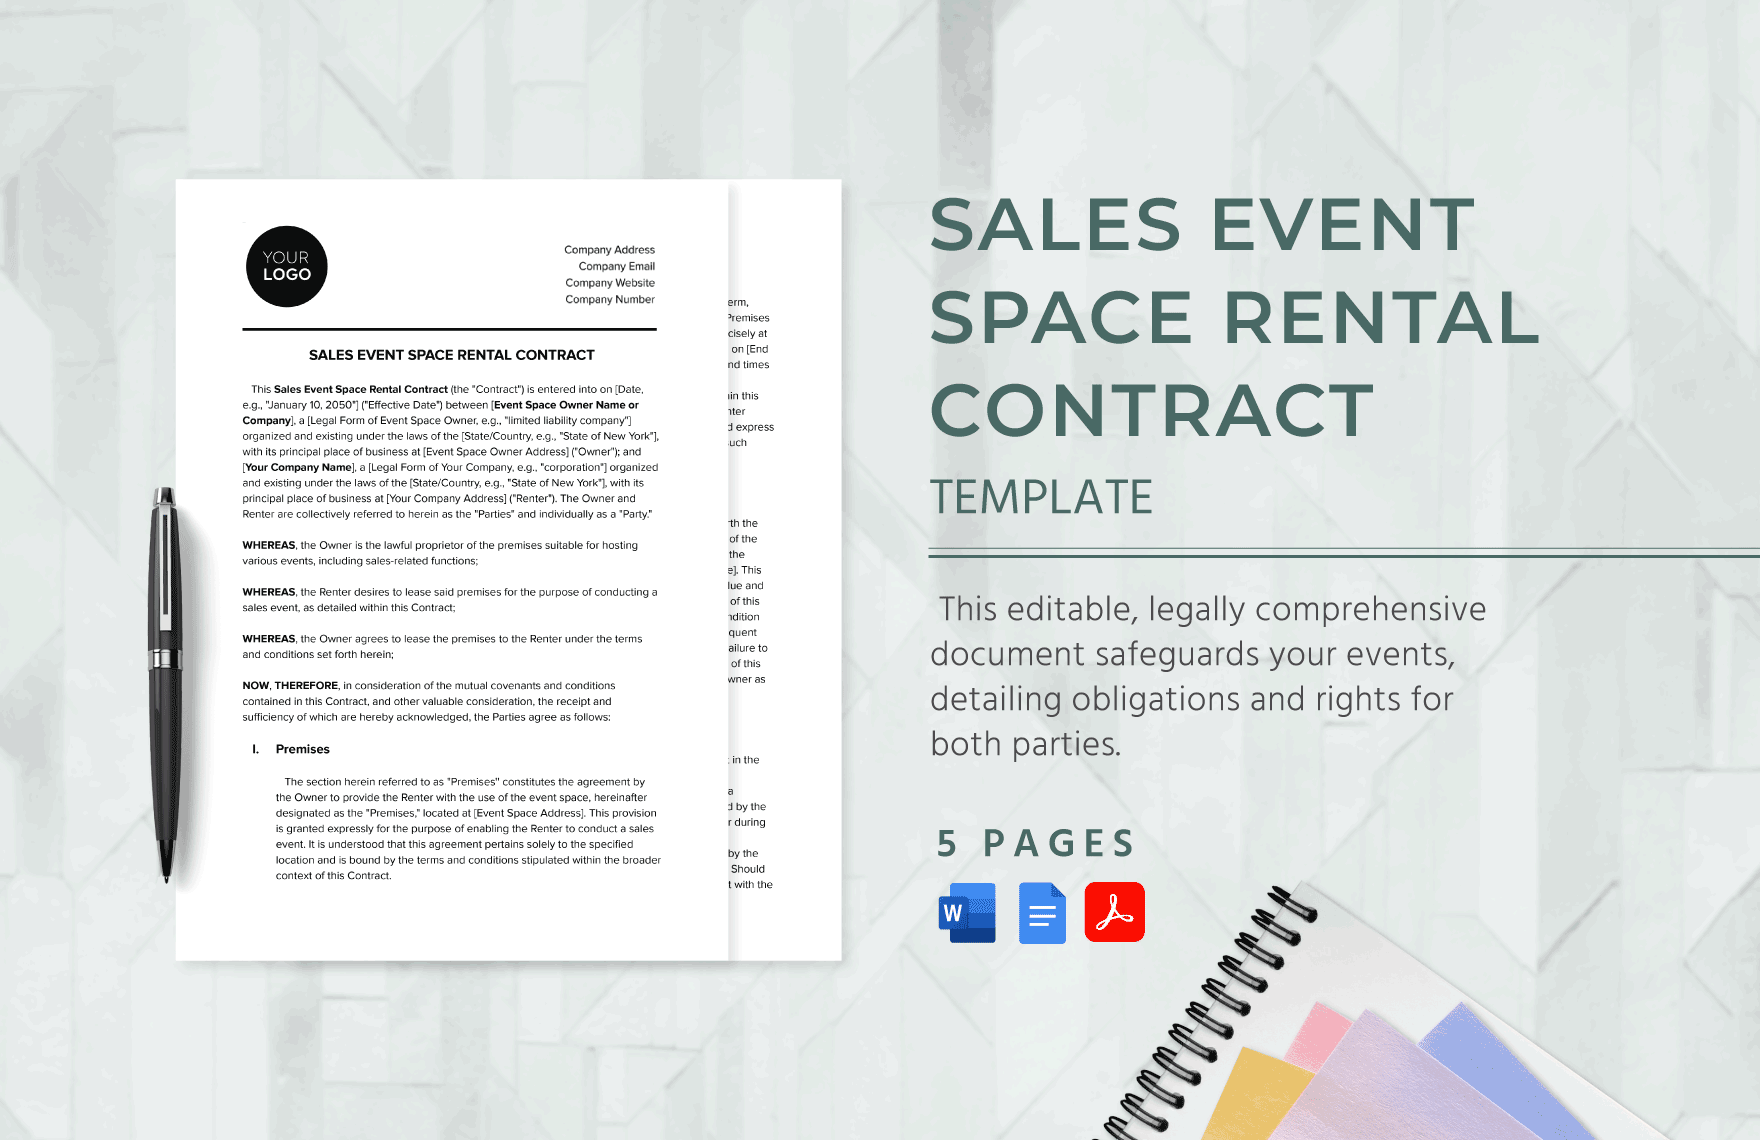 Sales Event Space Rental Contract Template